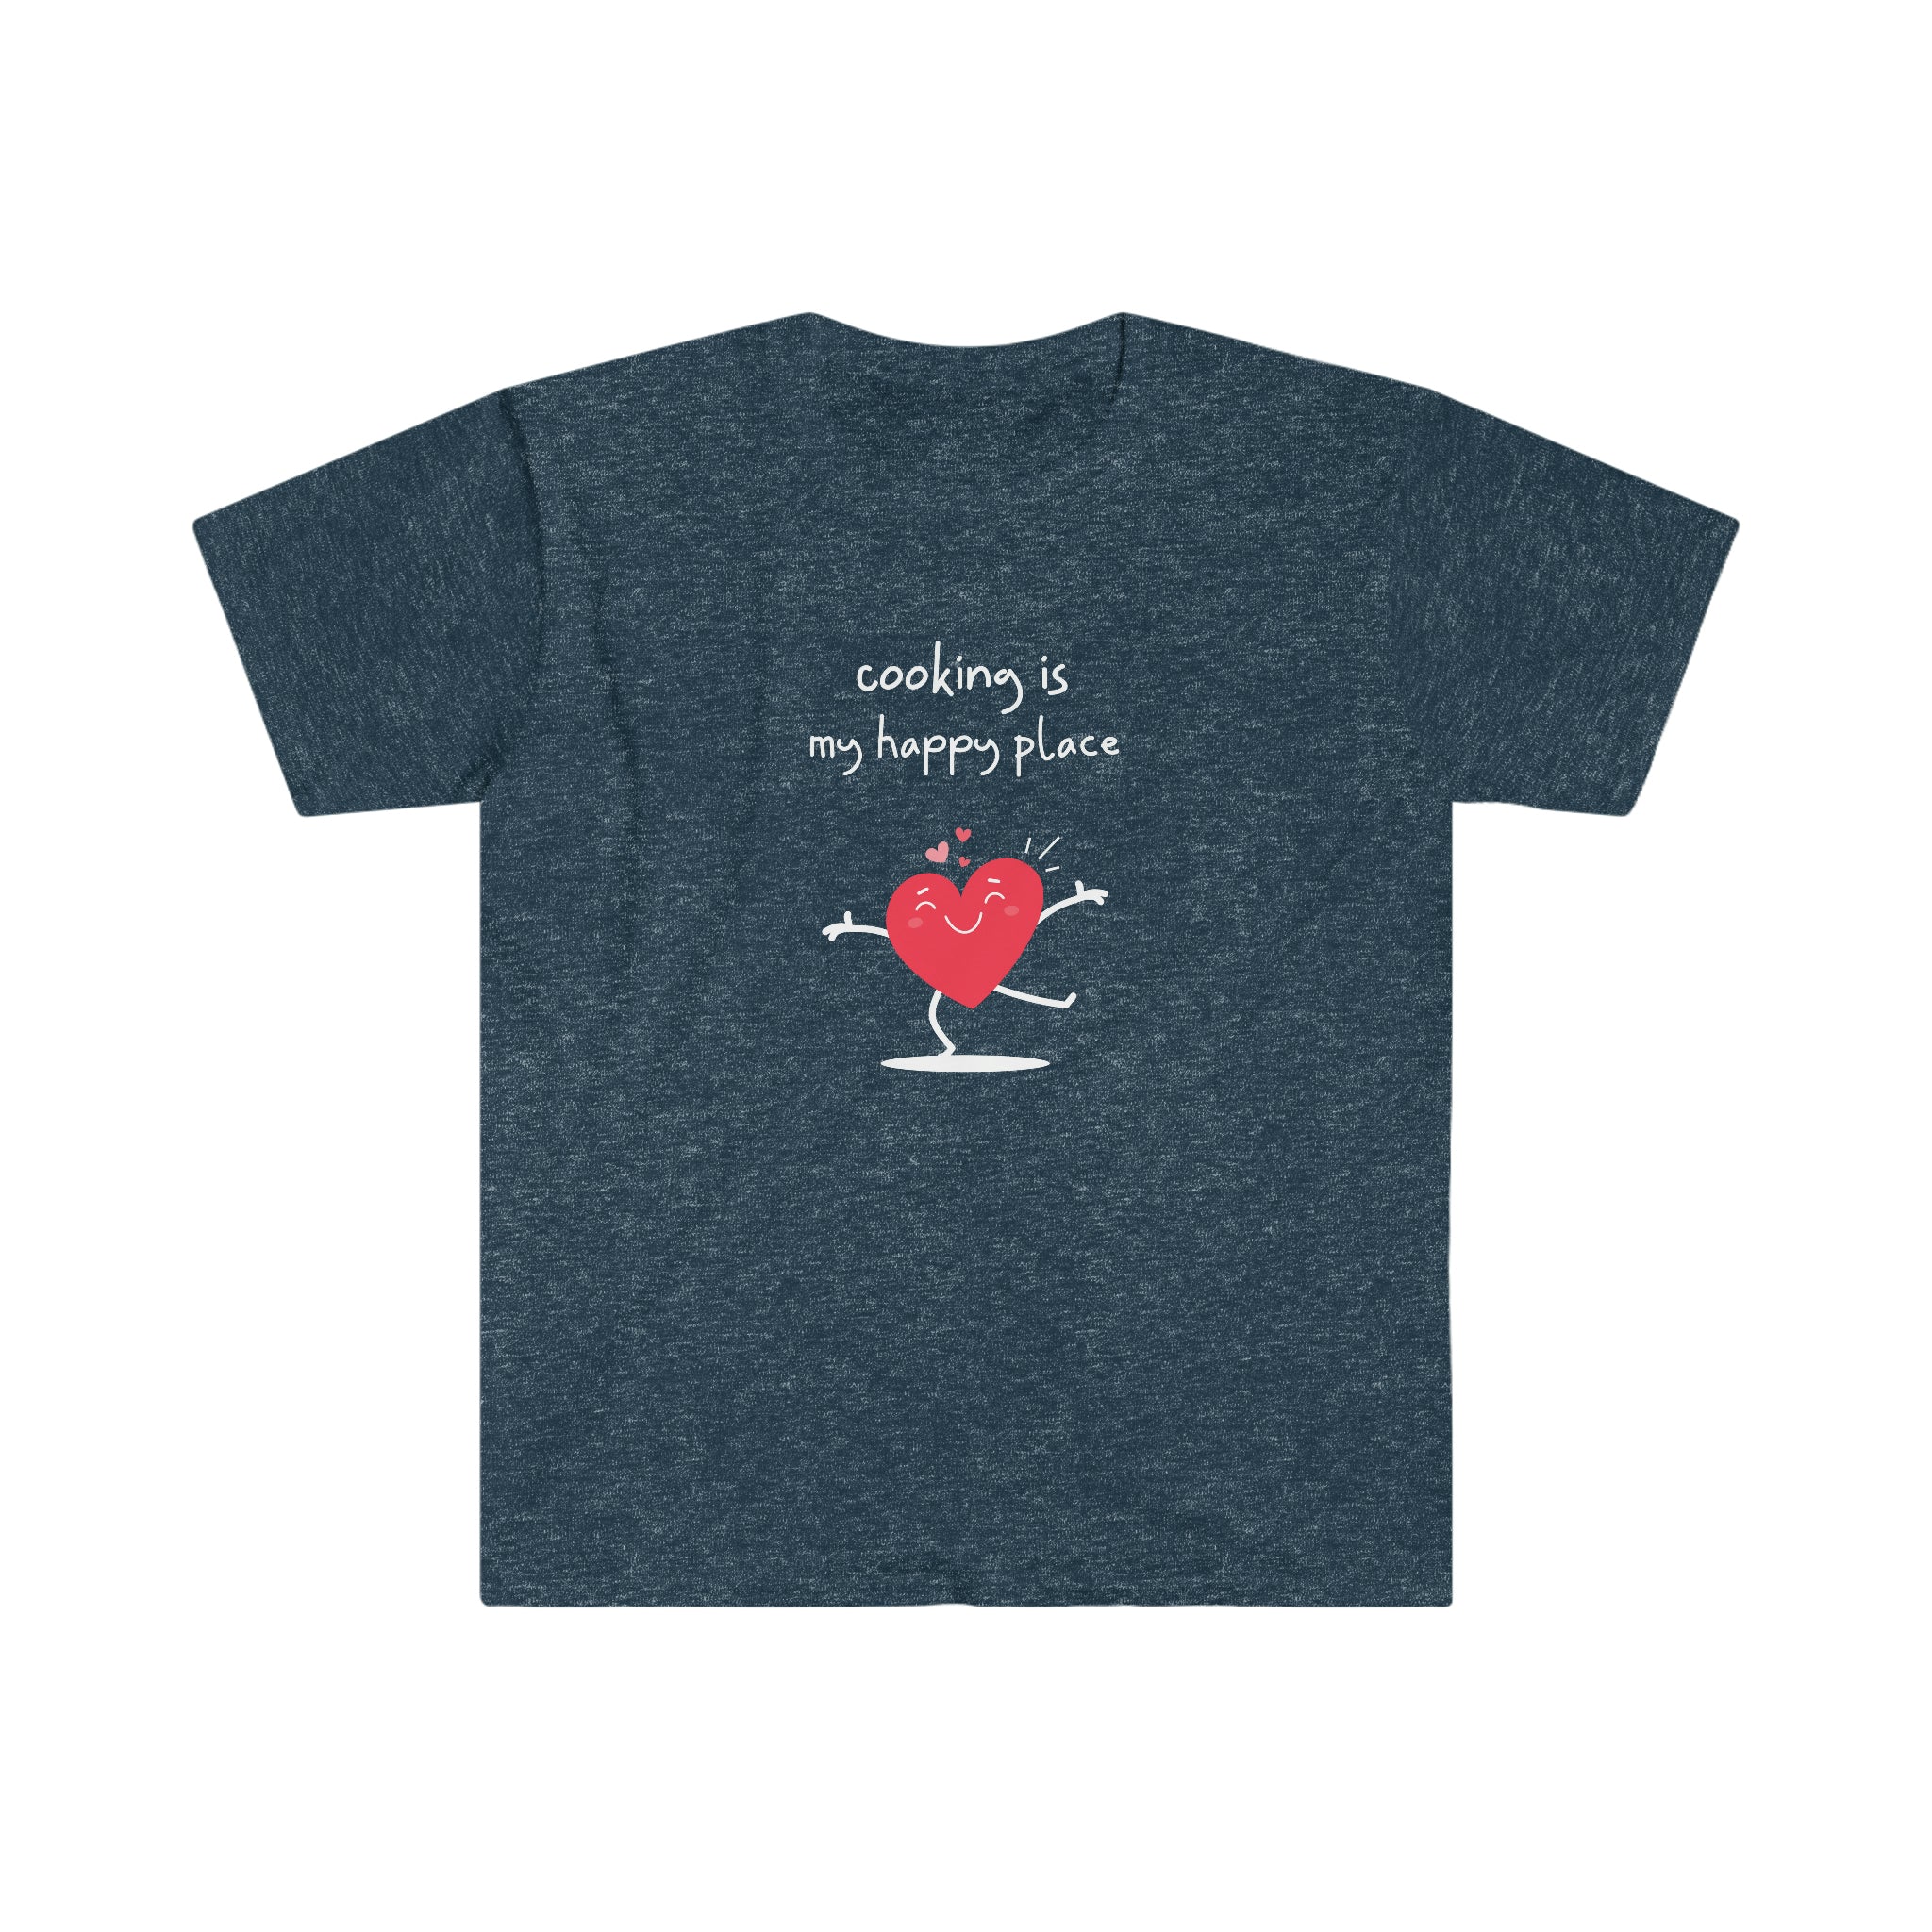 T-shirt, super soft, "Cooking is My Happy Place" T-Shirt - Comfortable, Chic and Playful - cooking t-shirt #6